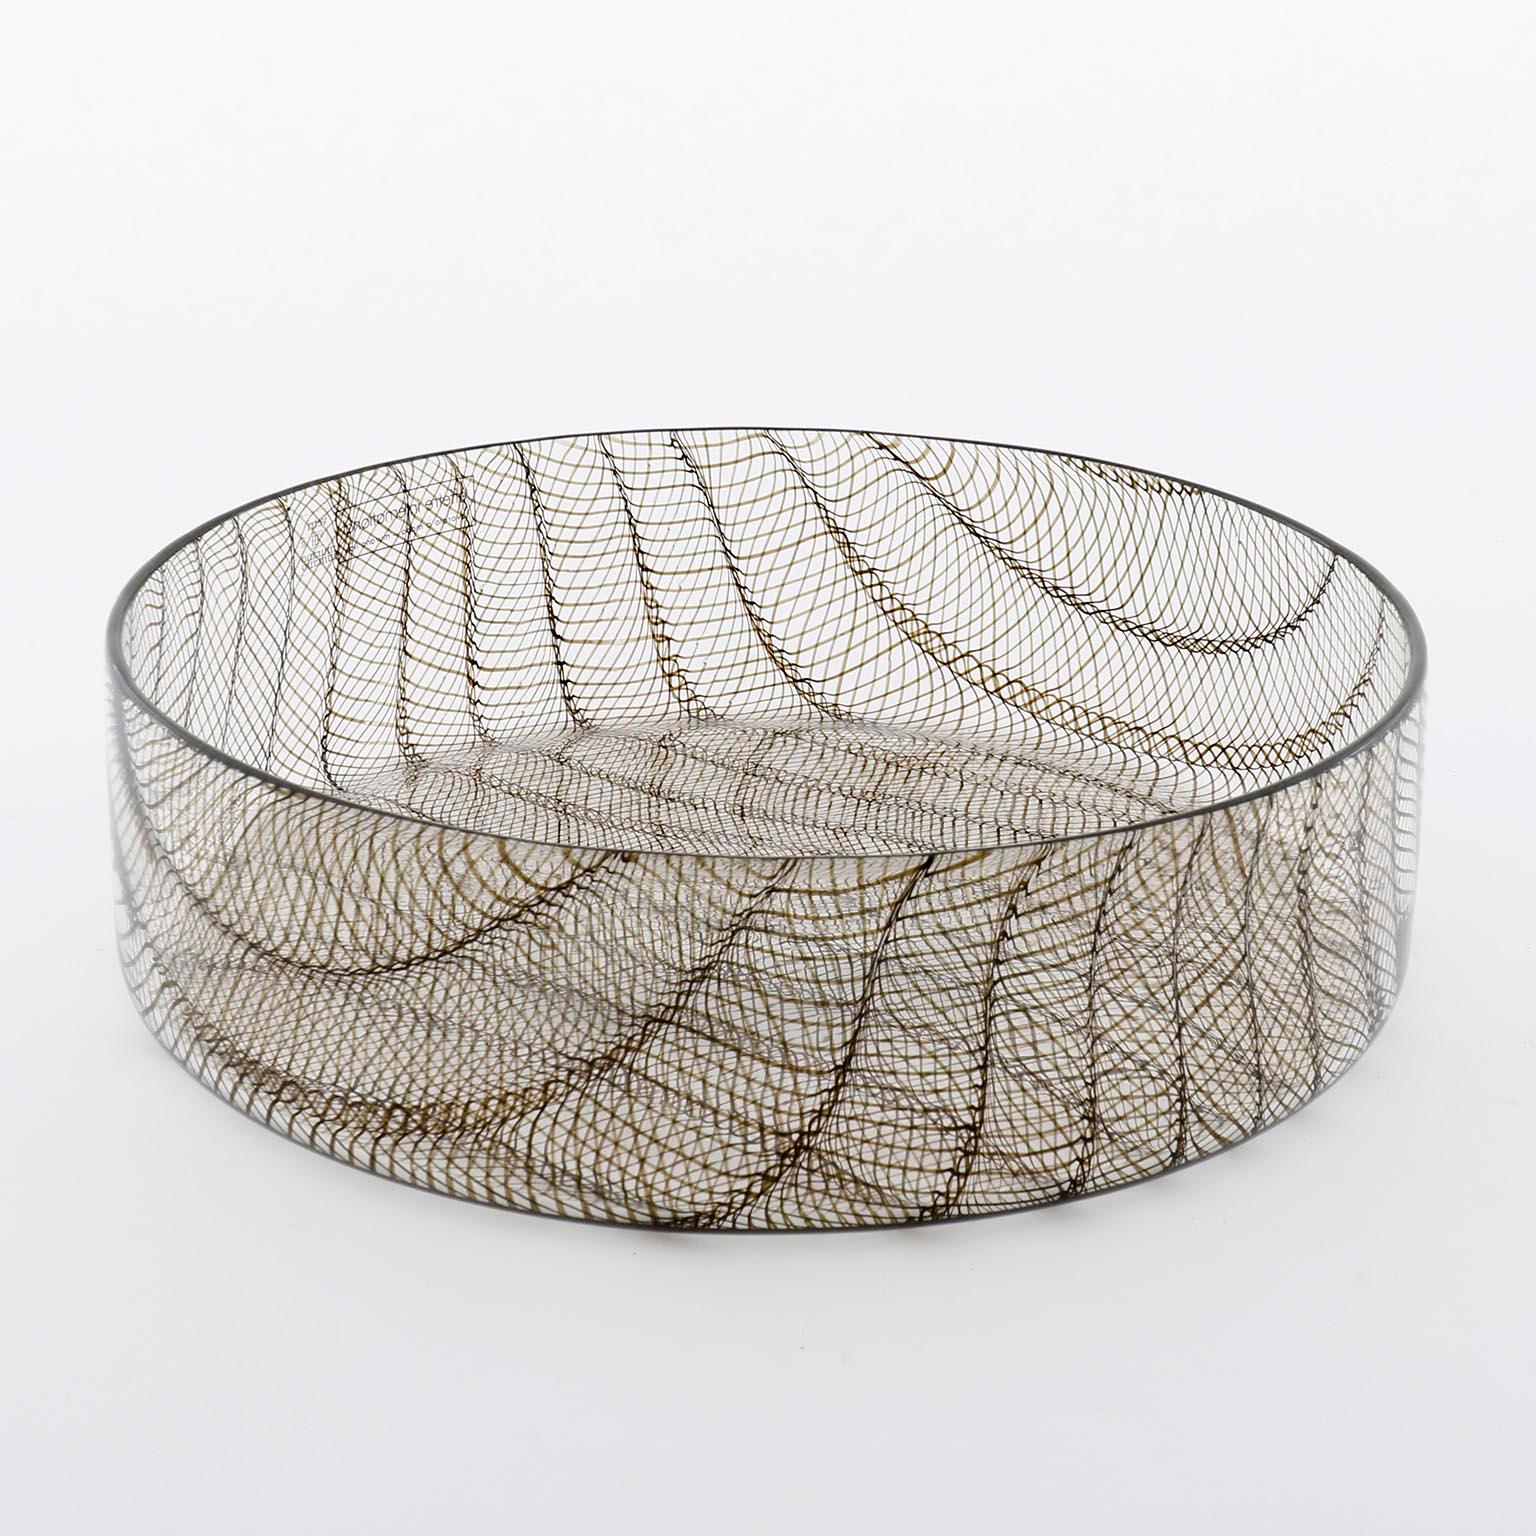 Glass Bowl by Lino Tagliapietra for Effetre, Clear Sepia Black Glass, Italy 1986 For Sale 1